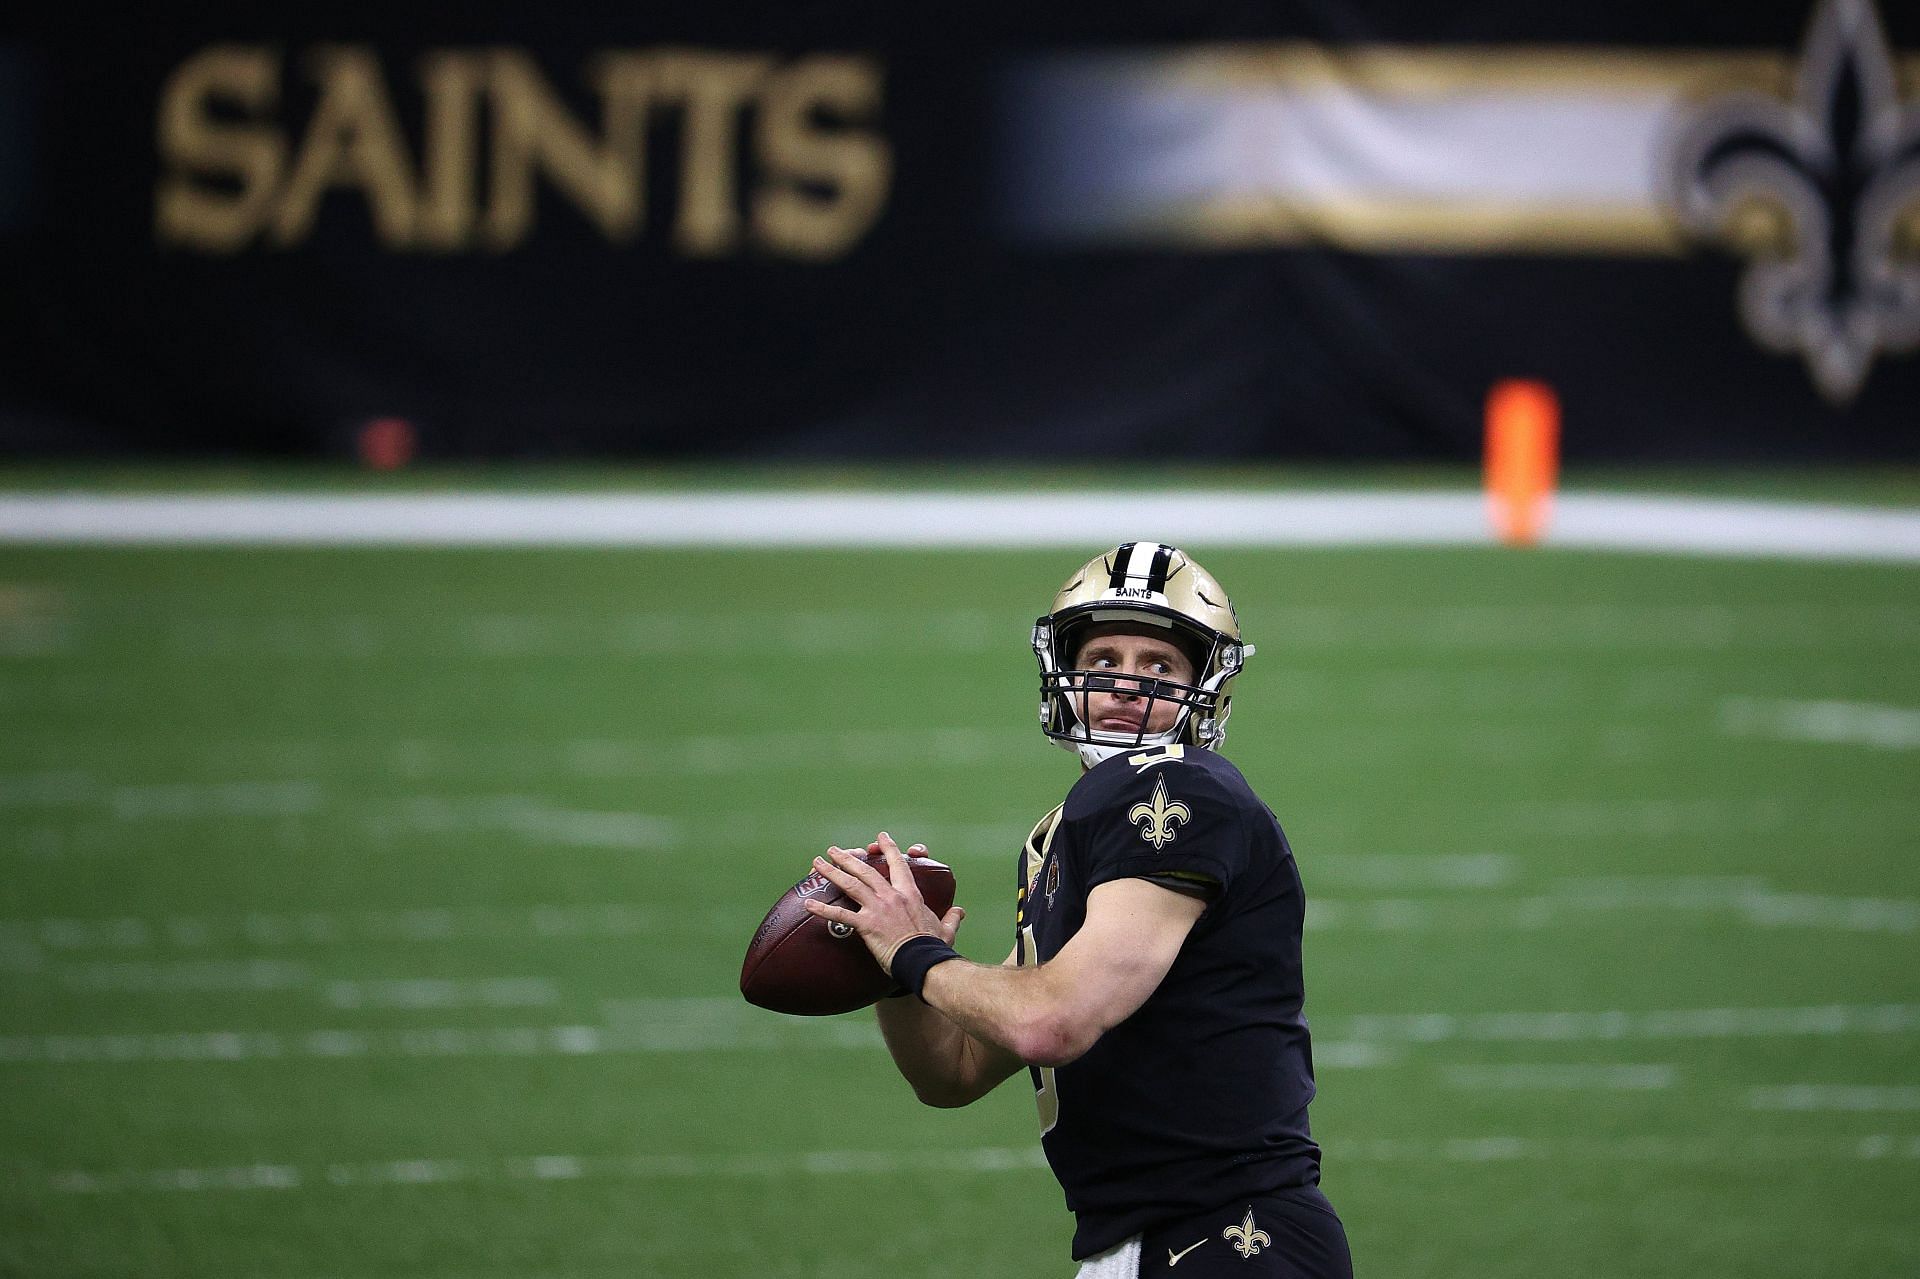 One and Done: NBC Sports confirms Drew Brees won't return